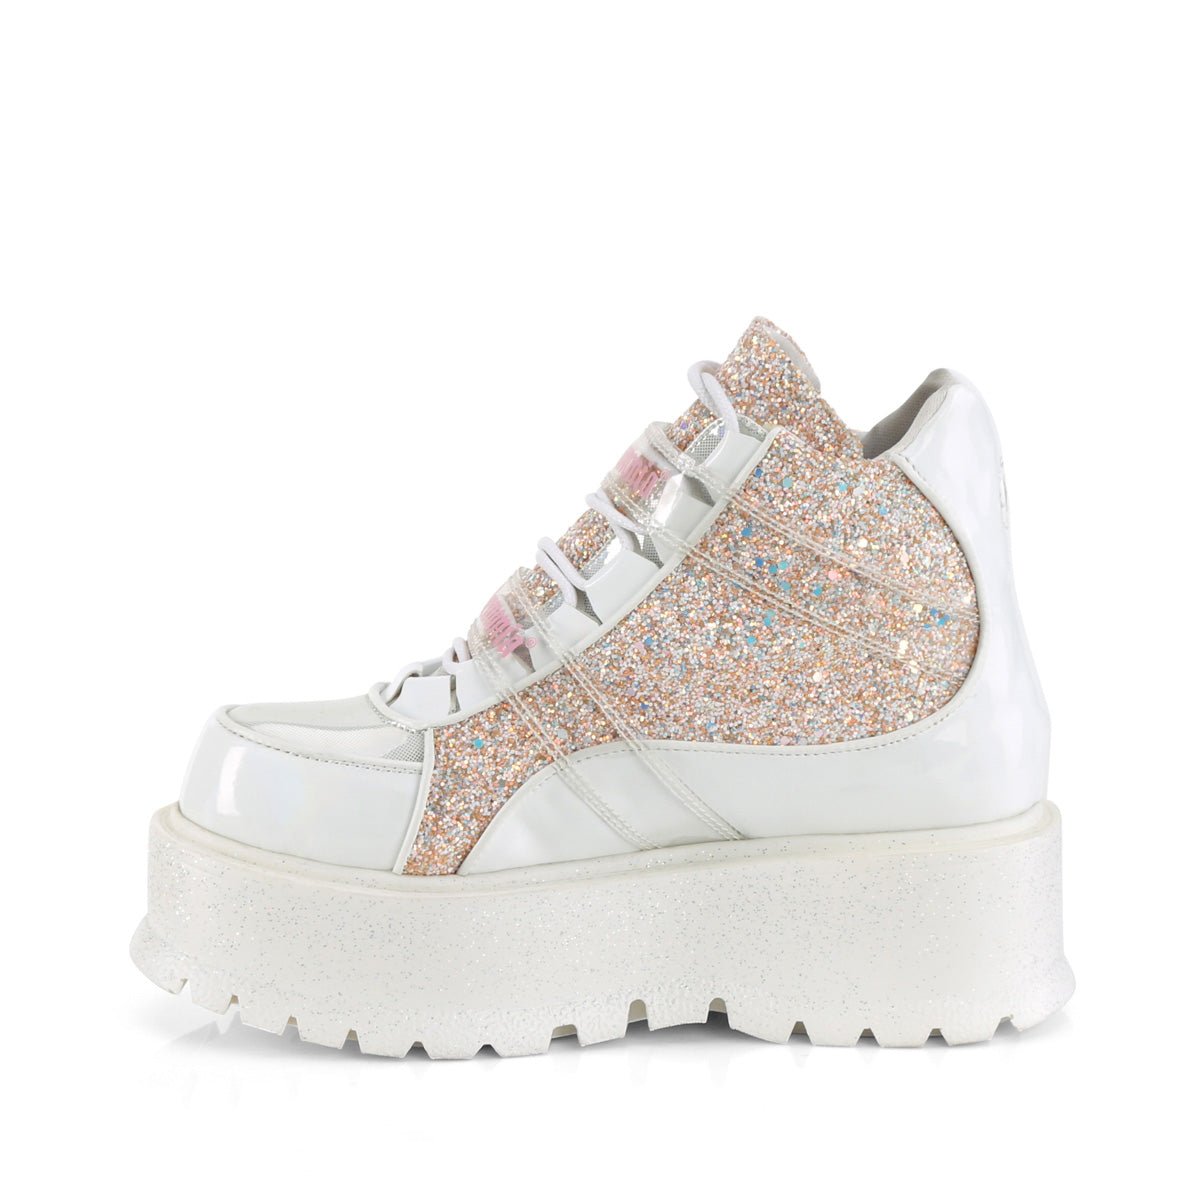 Too Fast | Demonia Slacker 50 | White & Baby Pink Holographic Patent Leather & Glitter Women's Ankle Boots